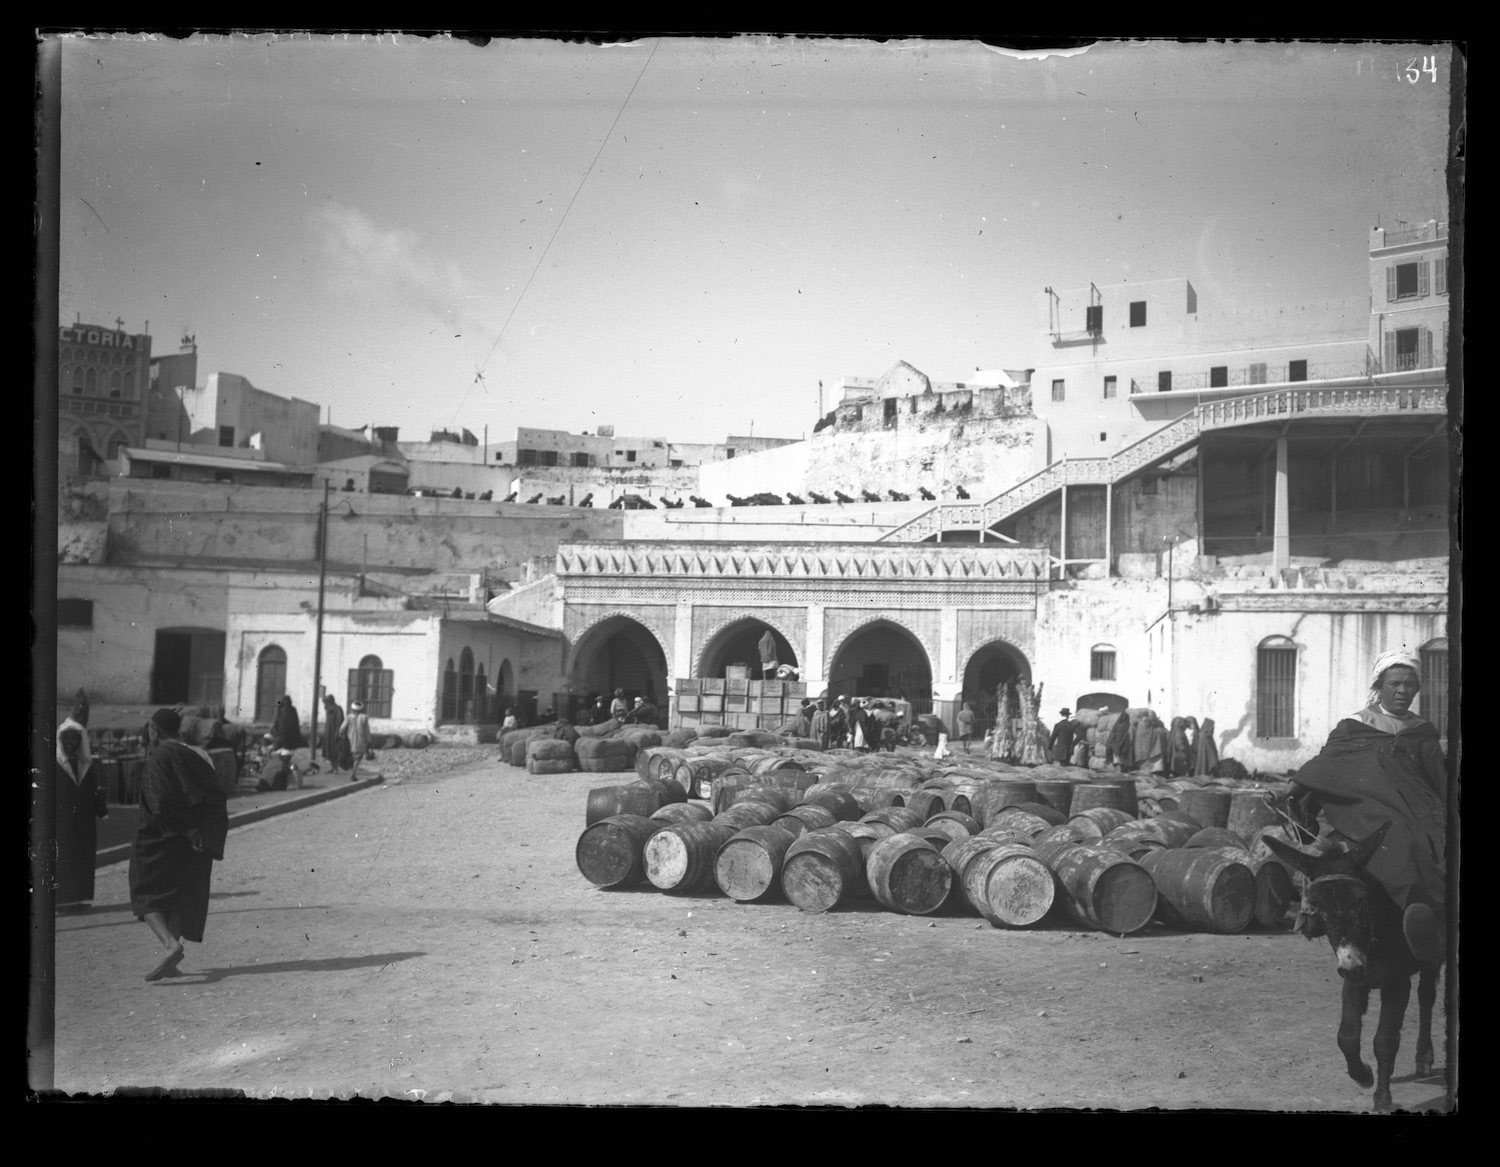 A pile of barrels lined up in front of the Customs House.  Hotel Continental in the background